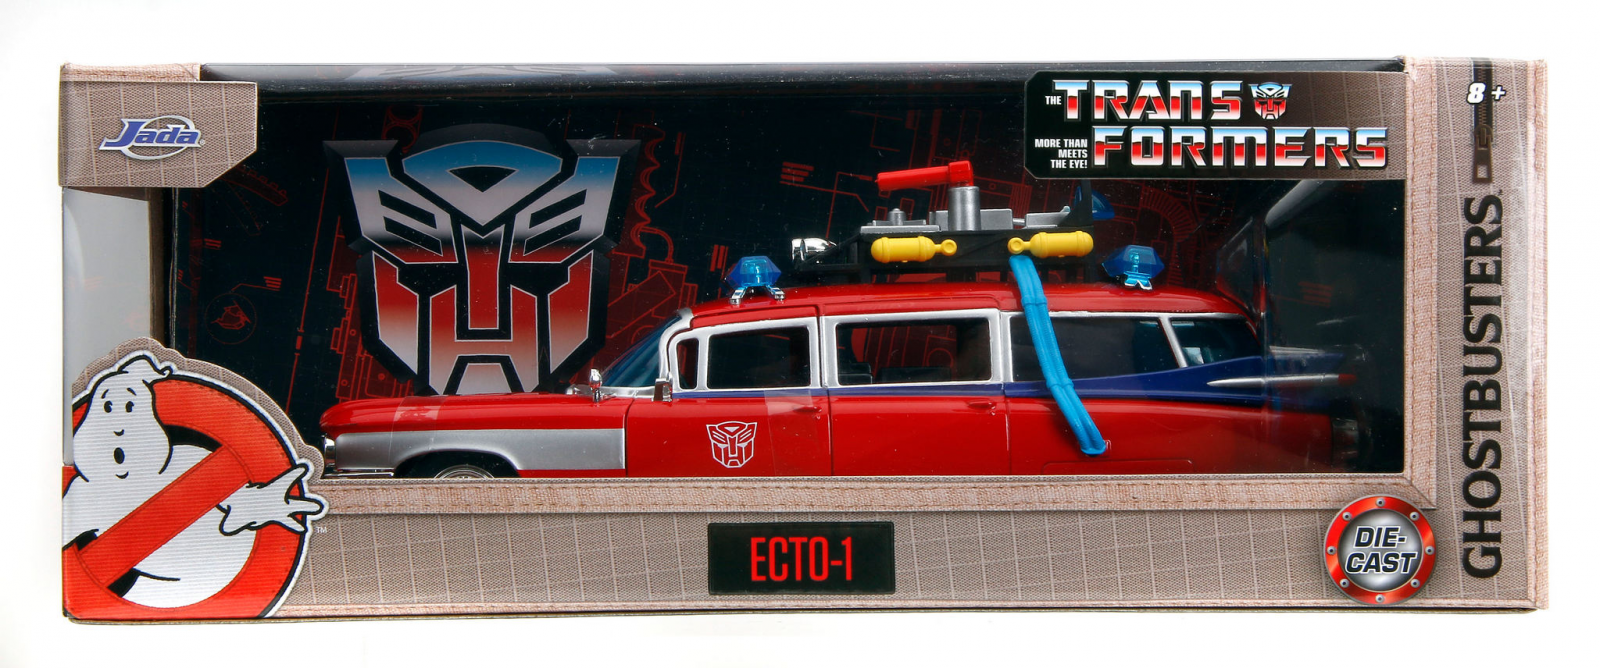 Transformers News: Transformers 40th Anniversary Includes Collaboration with Funko, Ghostbusters and the Masked Singer